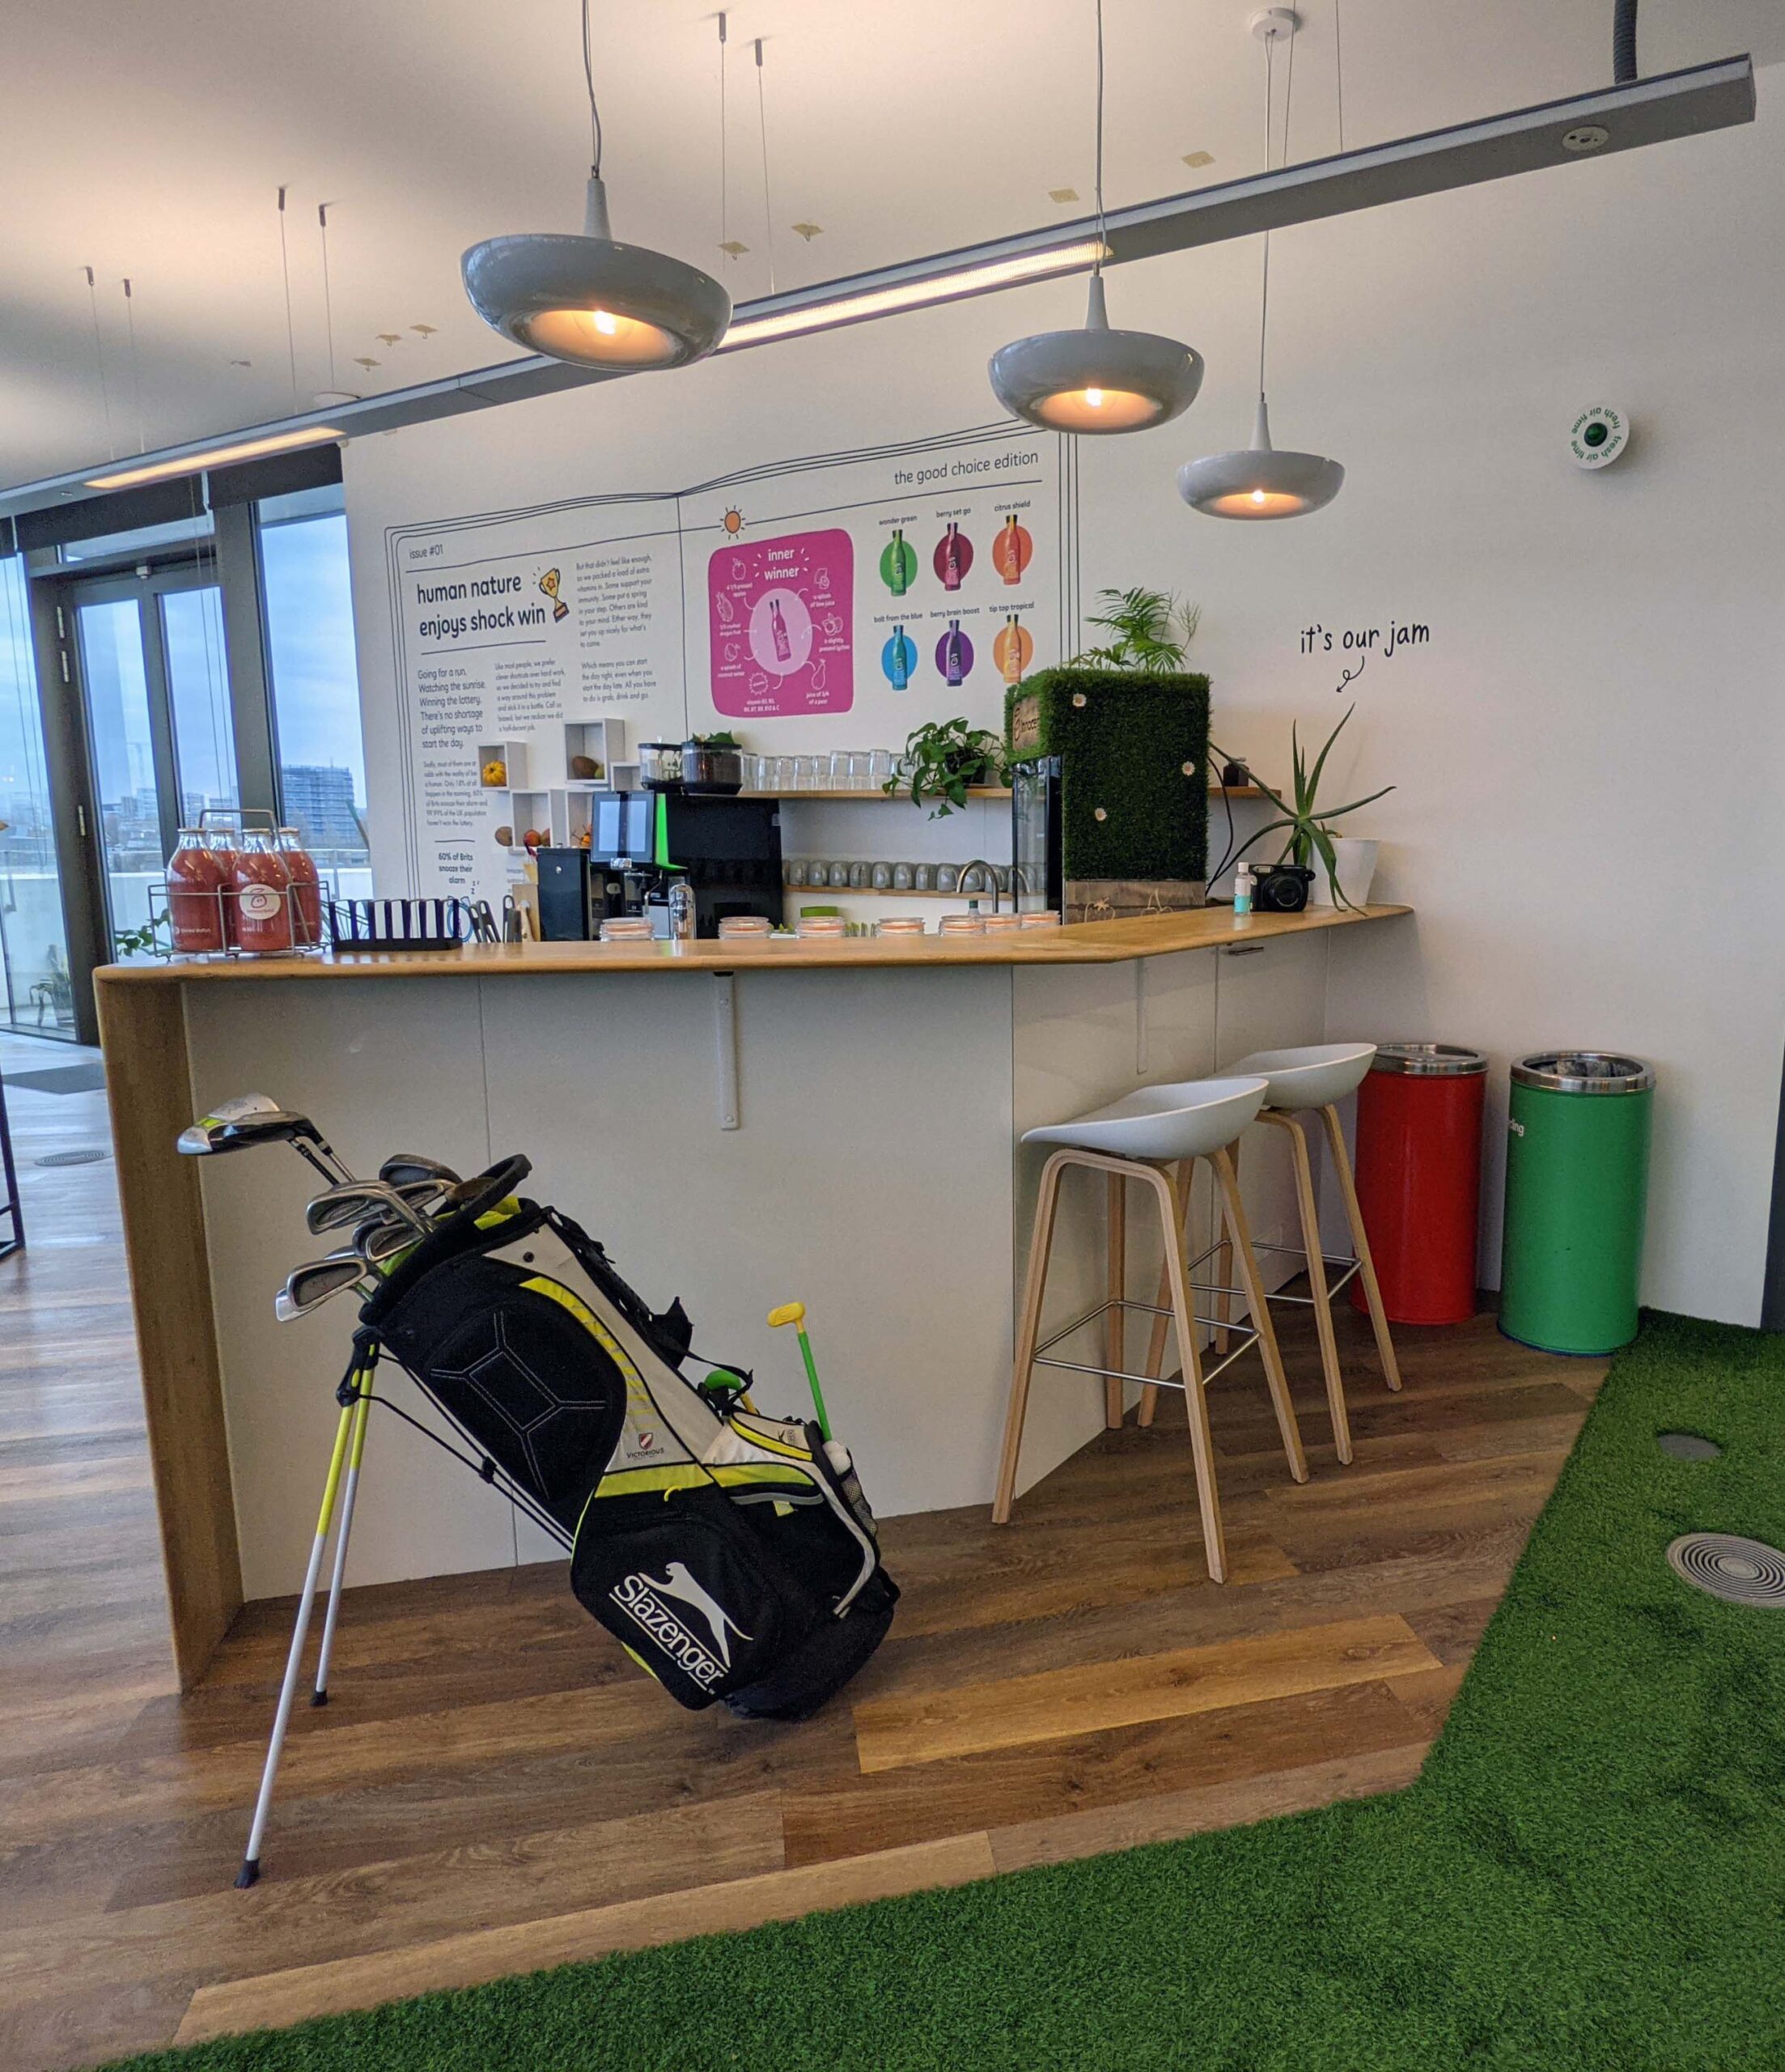 A photo of a colourful office. In the middle of the office is mini kitchen with bottles of smoothies on the sideboard. In front of that is a golf bag. The floor is laid with wood and astroturf.